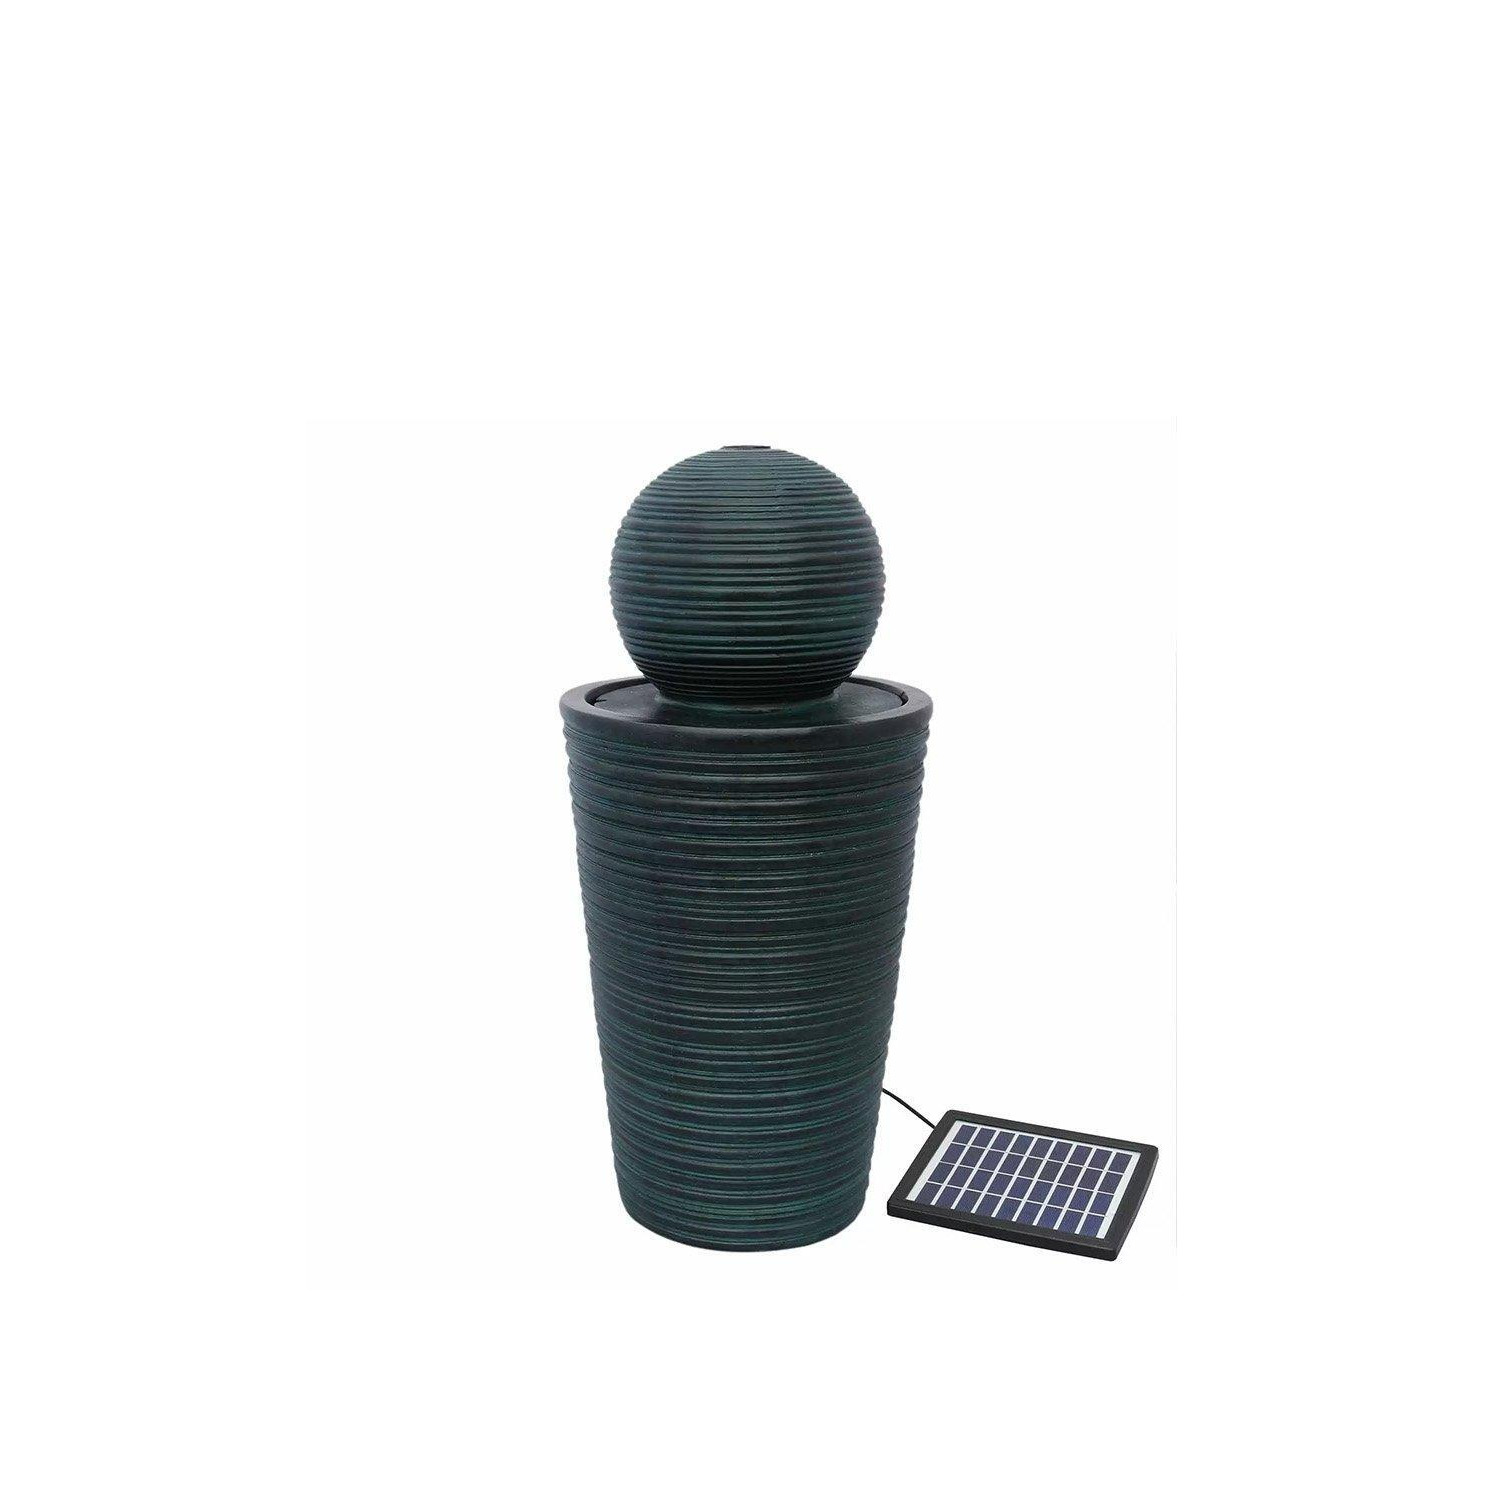 Round Ball Solar Water Feature - image 1